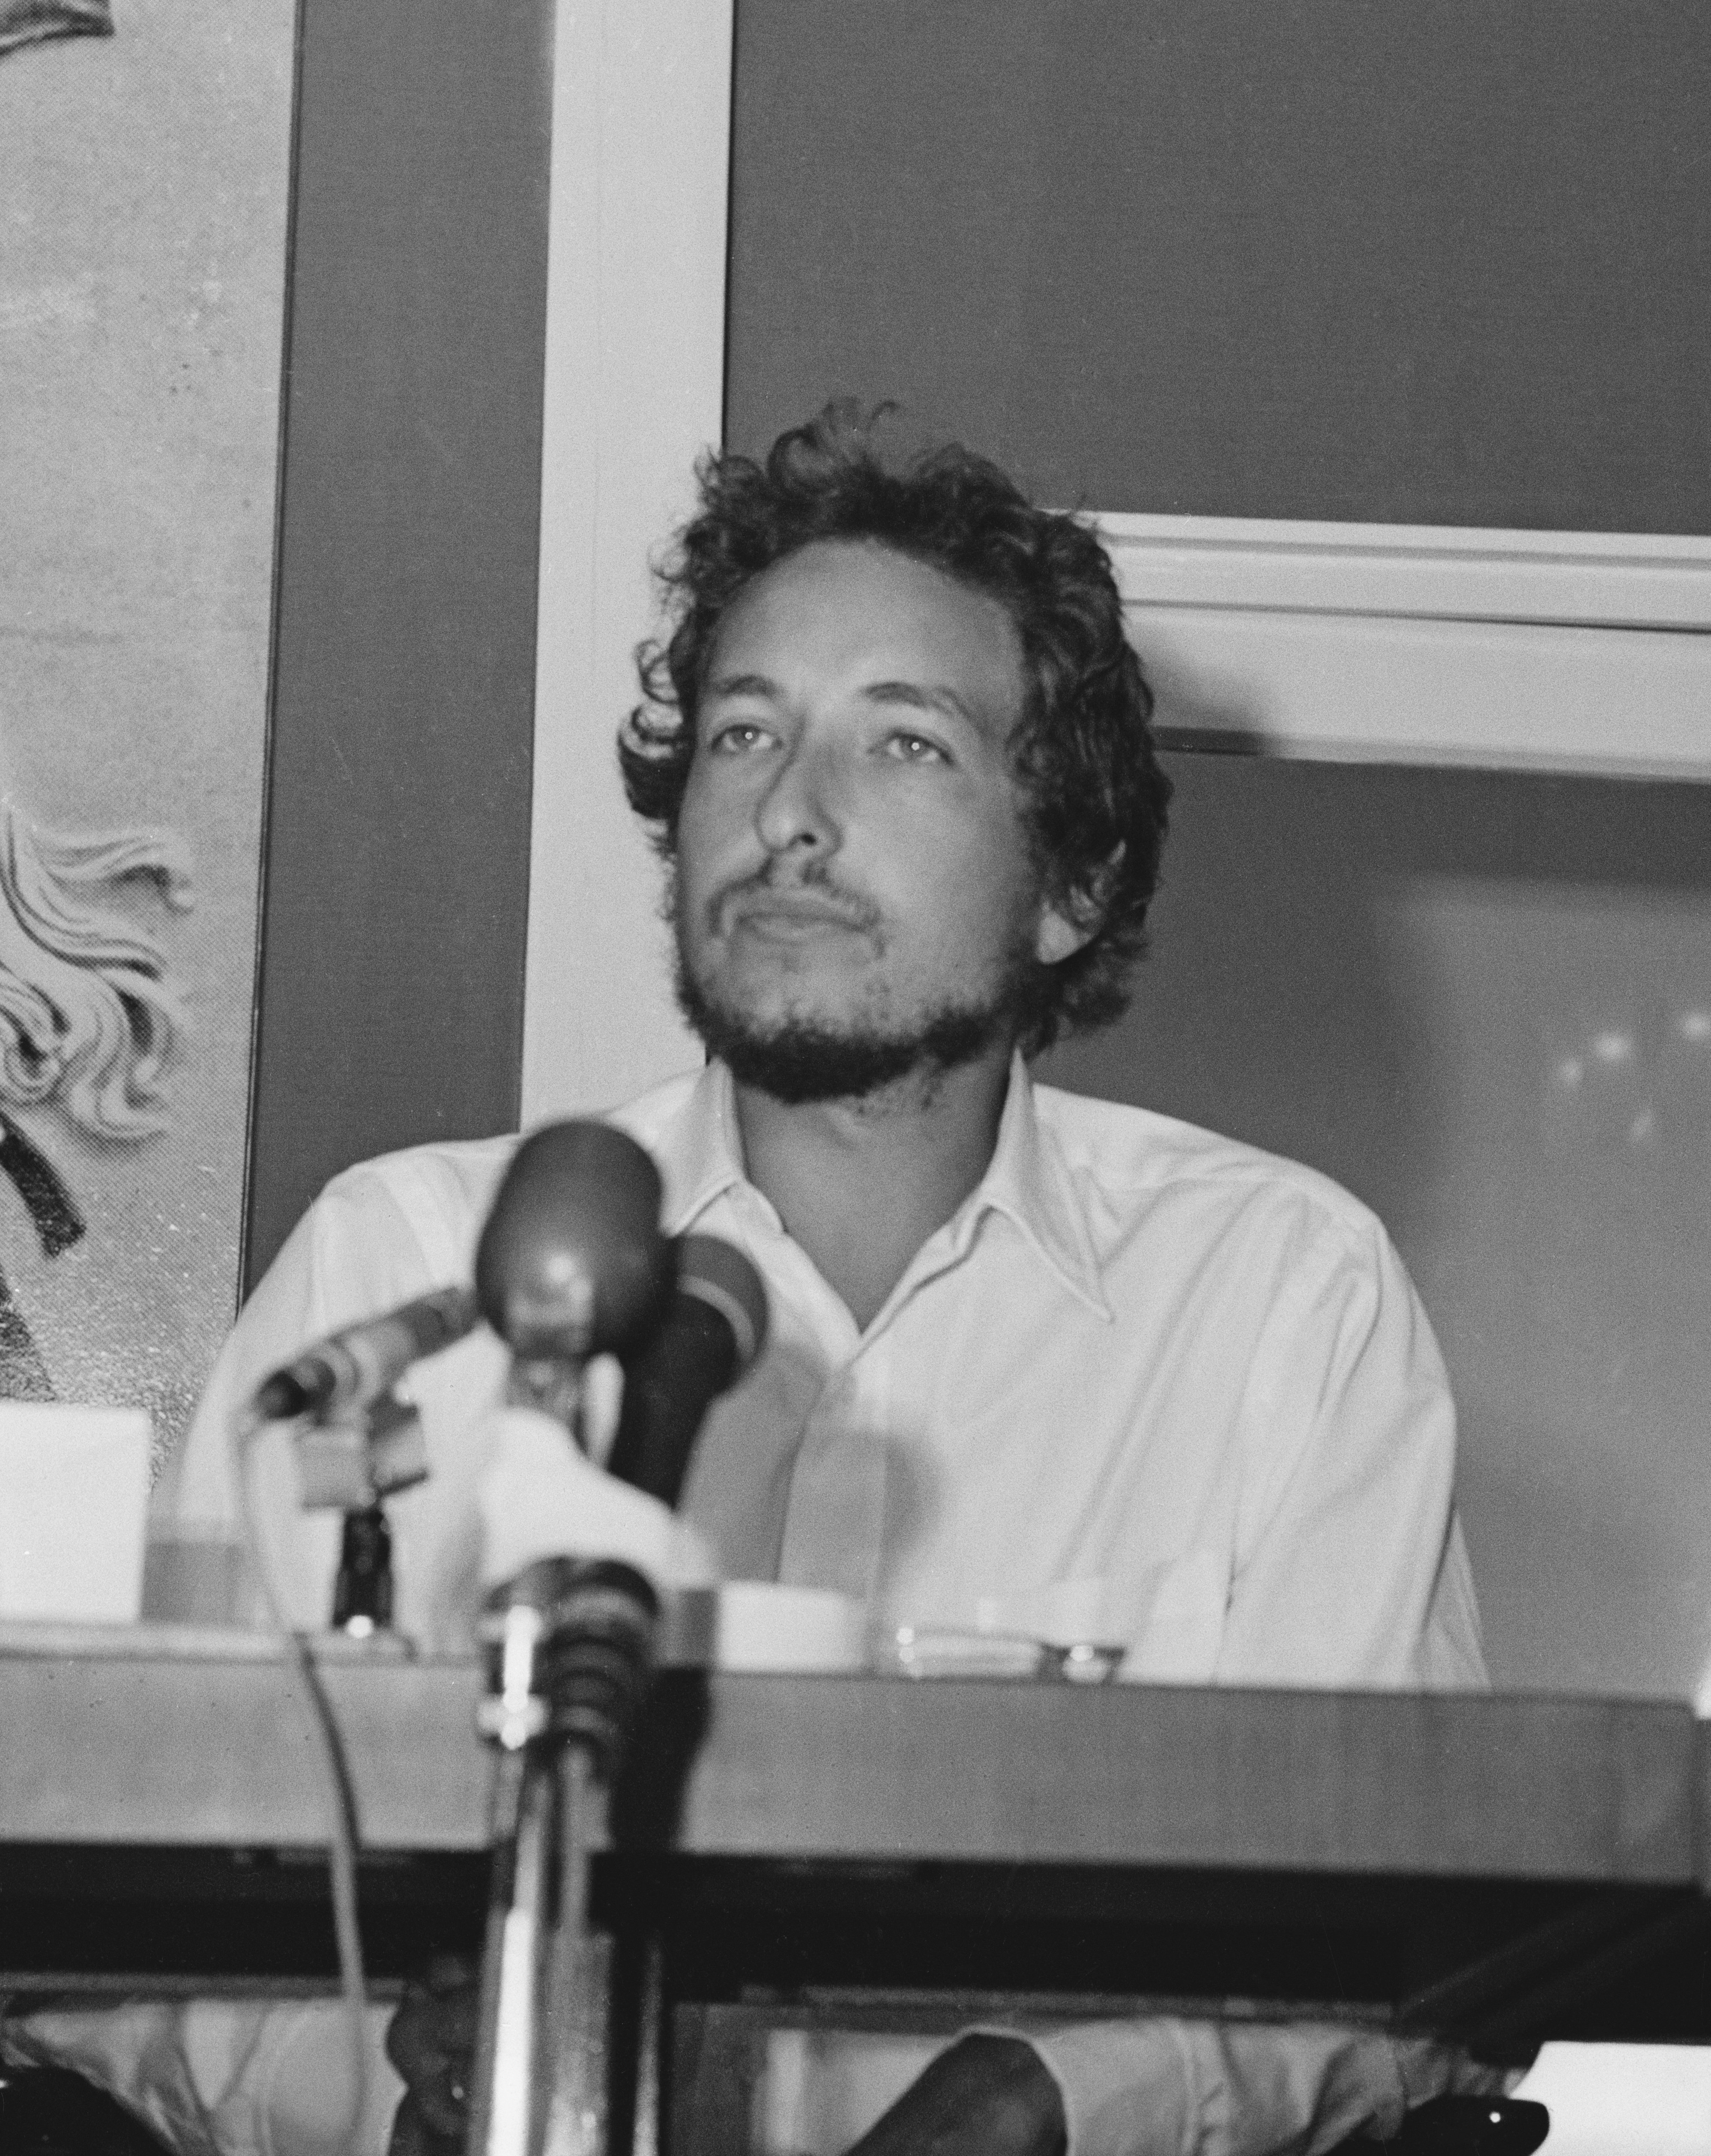 Bob Dylan at the Isle of Wight Festival press conference in London on August 27, 1969 | Source: Getty Images